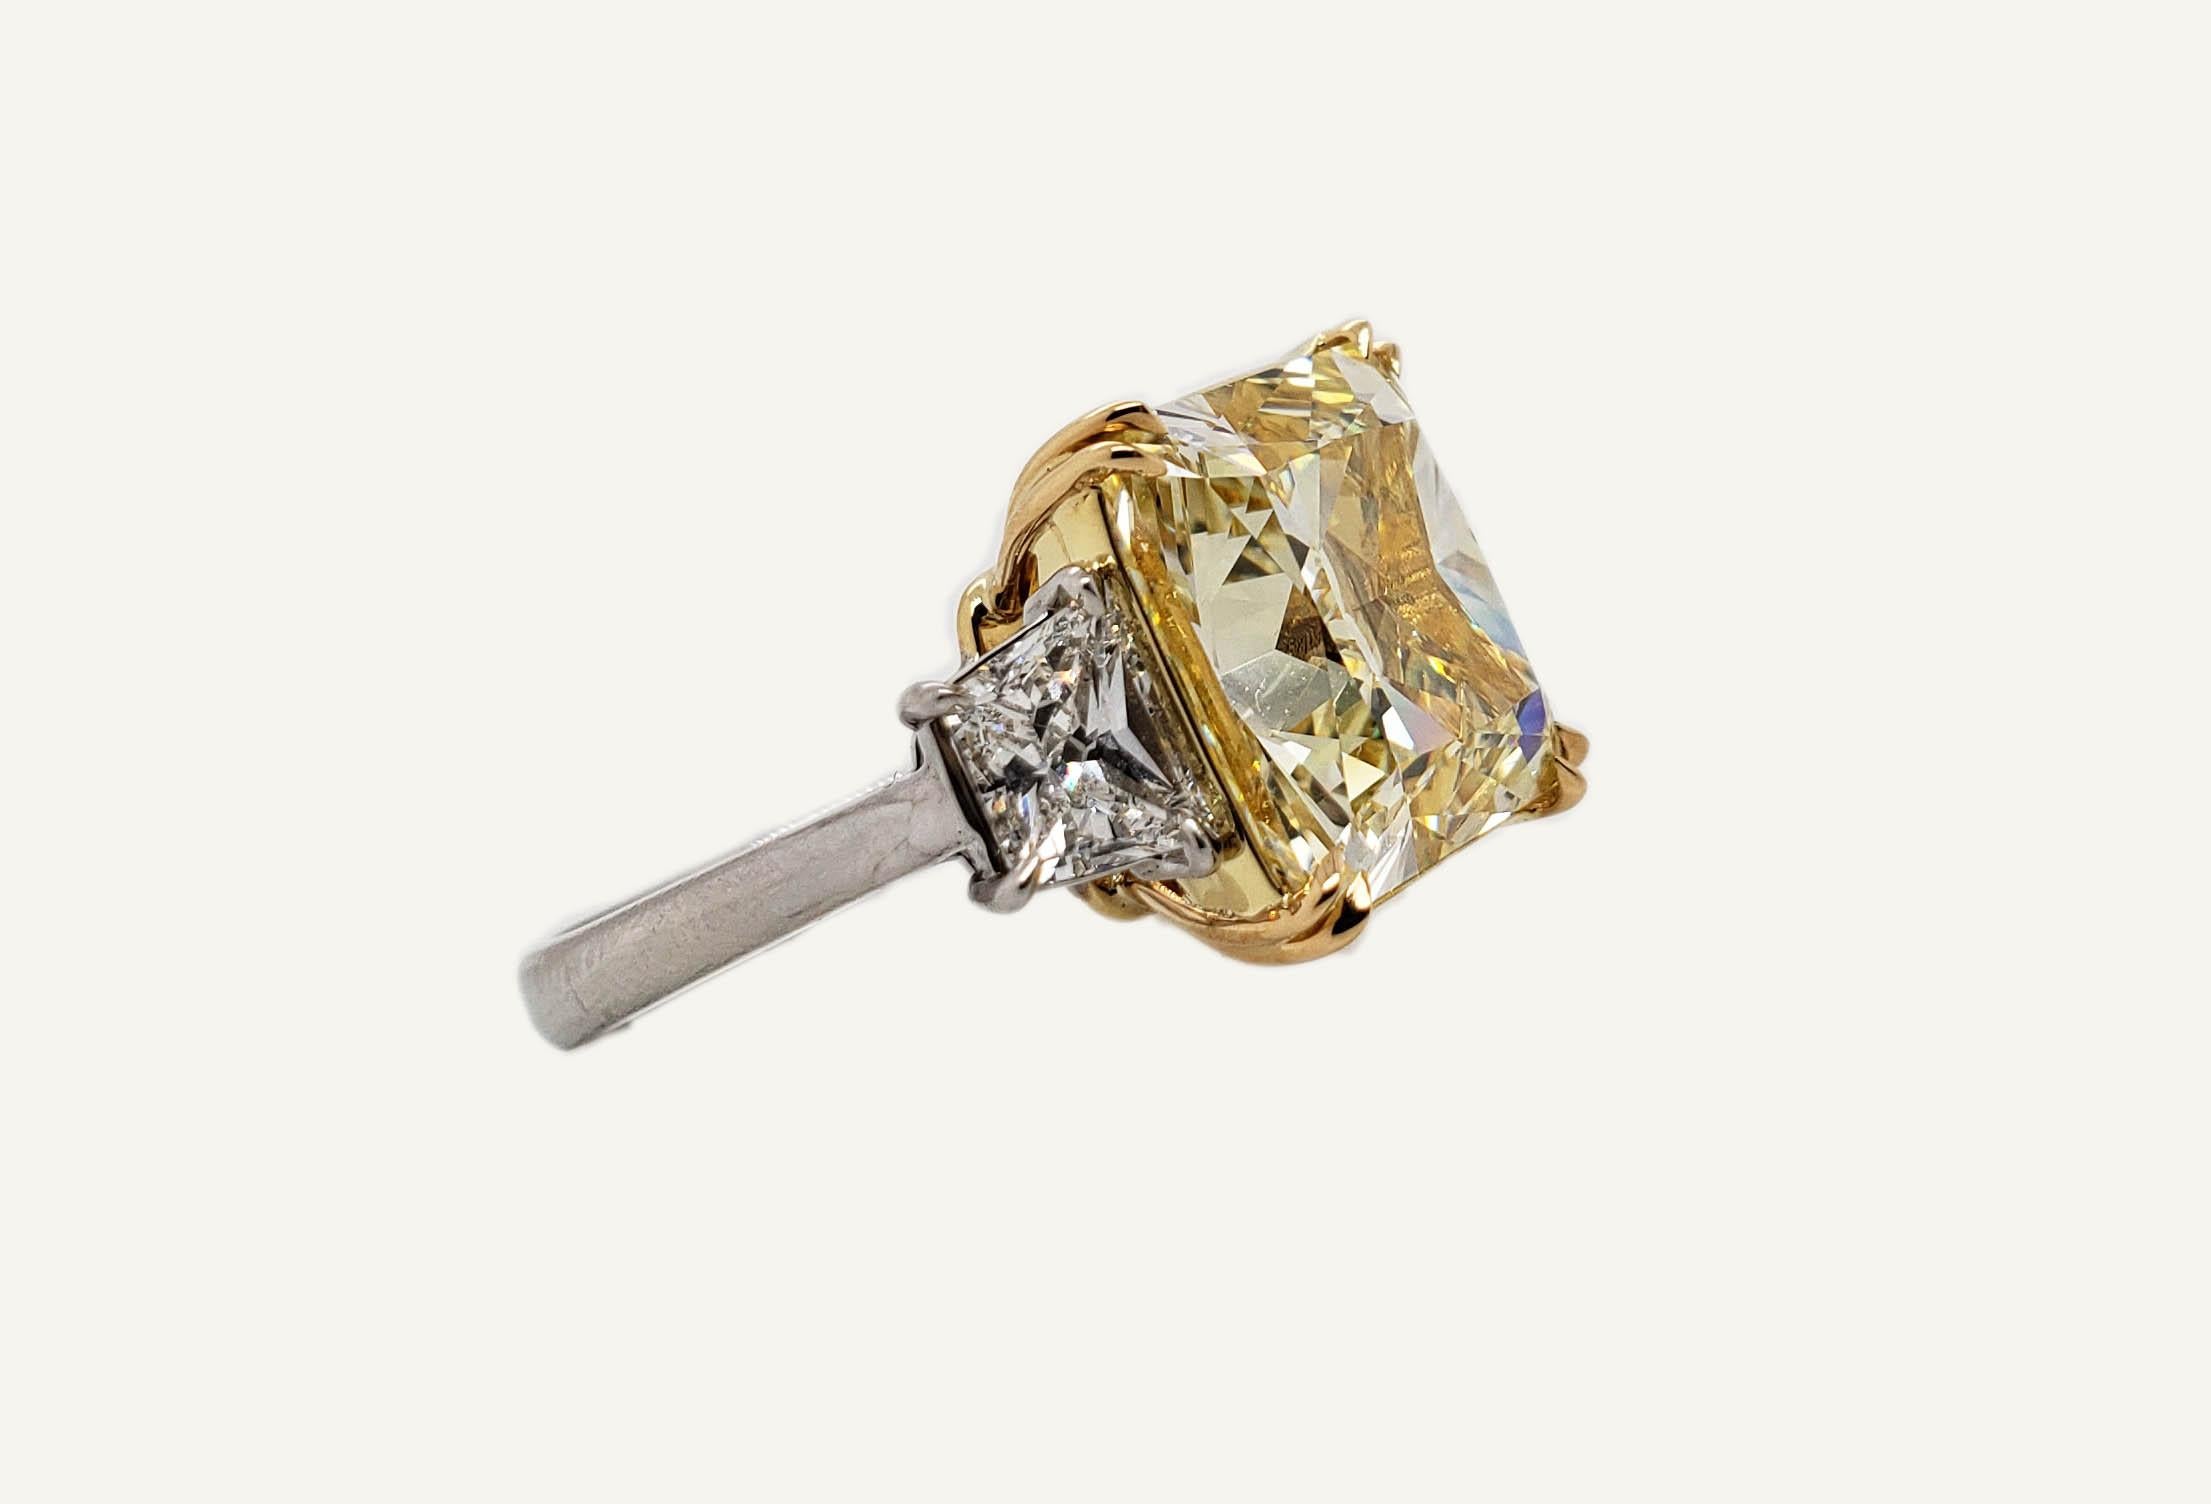 Contemporary Scarselli 11 Carat Fancy Yellow Radiant Diamond Ring in Platinum 'GIA' For Sale